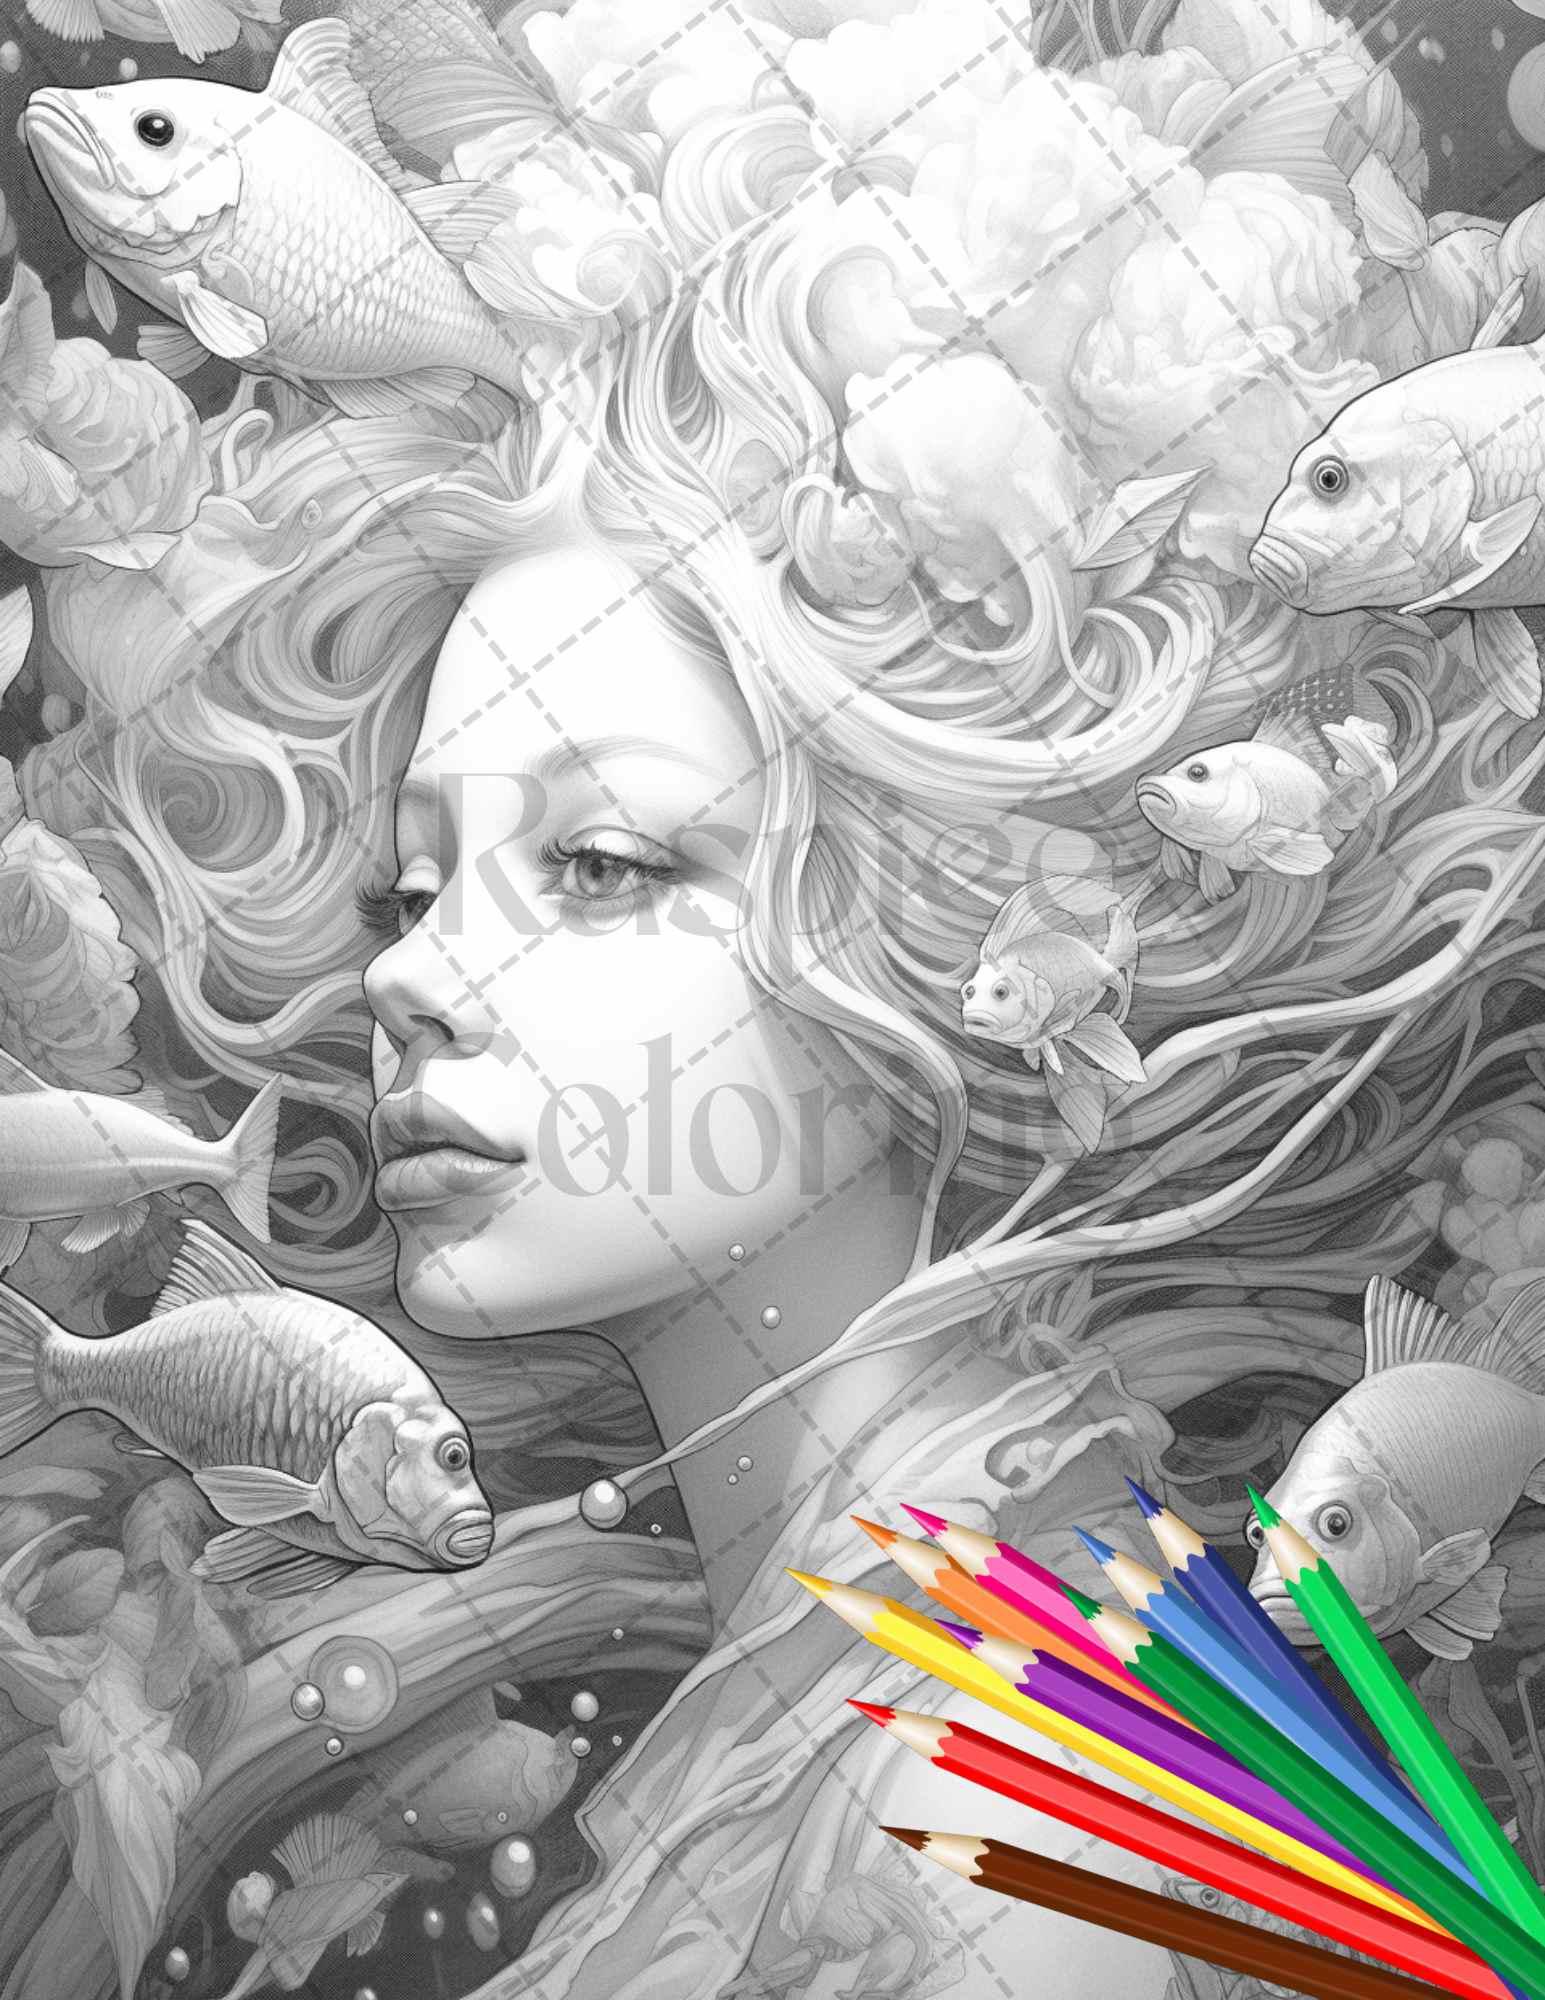 PRINT Tranquil Mermaid Art Pencil Drawing Black and White 